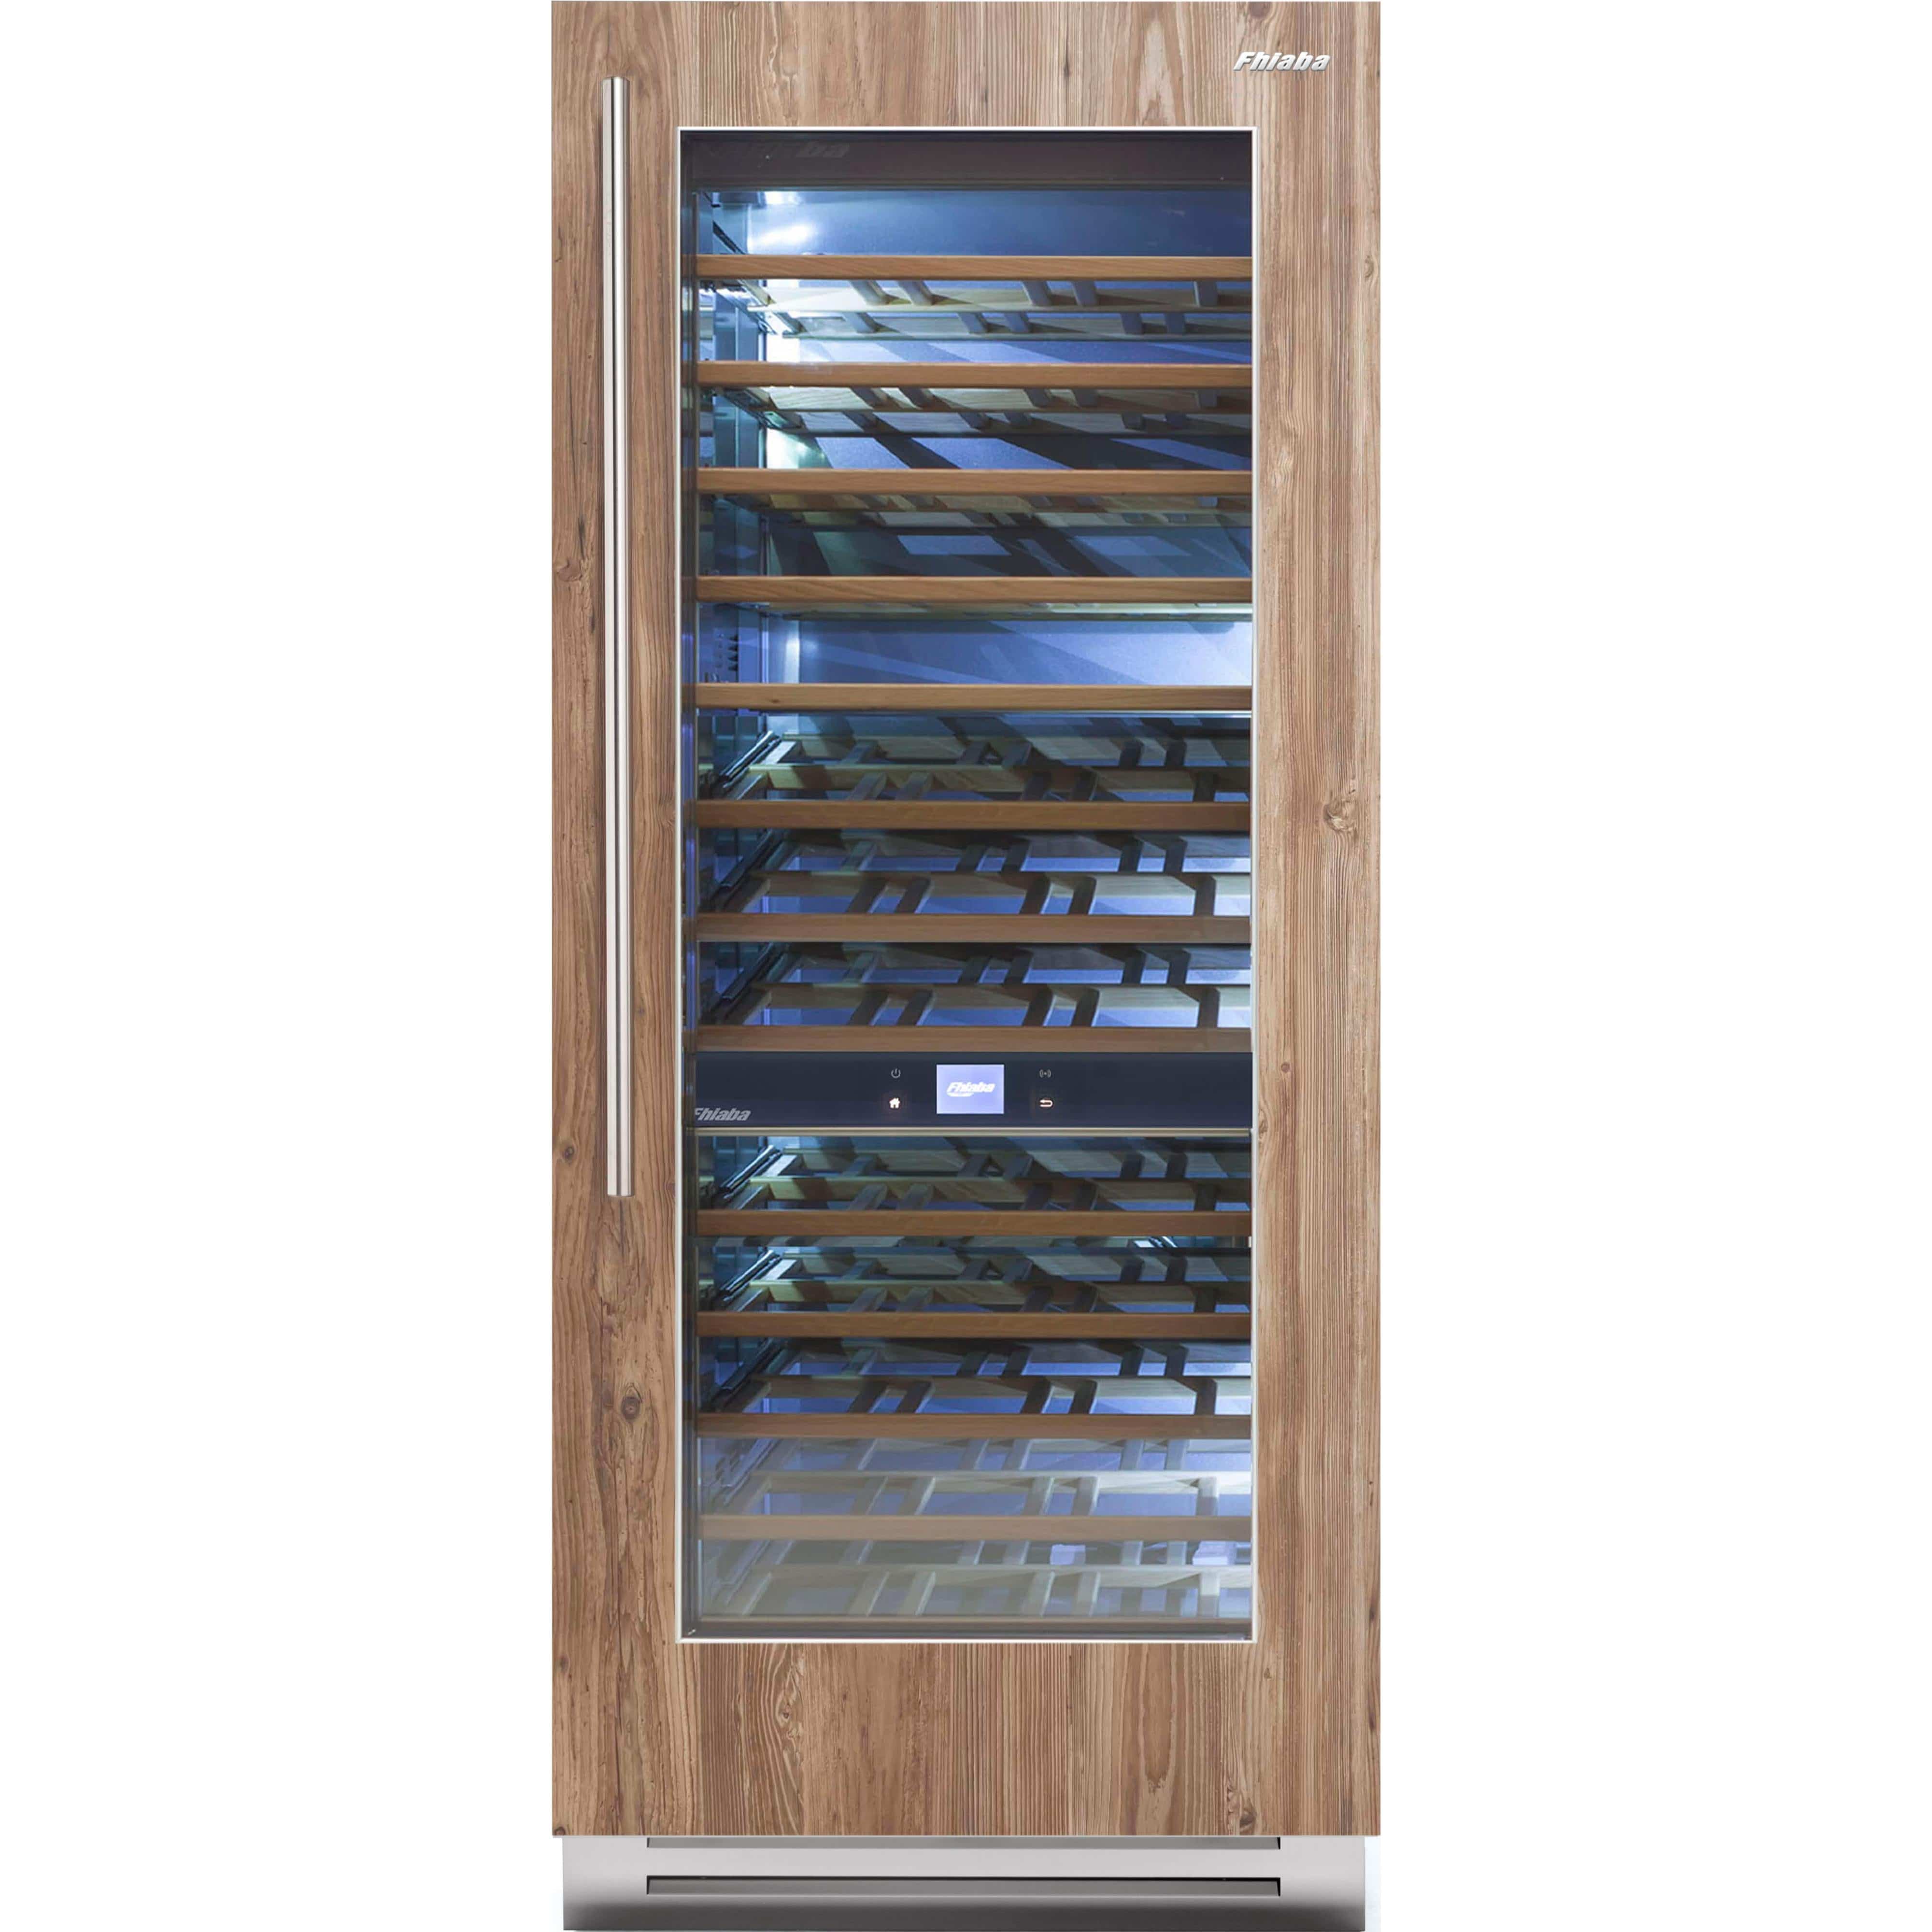 Fhiaba 186-Bottle Integrated Series Wine Cellar with Smart Touch TFT Display FI36WCC-RO2 Wine Storage FI36WCCRO2 Luxury Appliances Direct